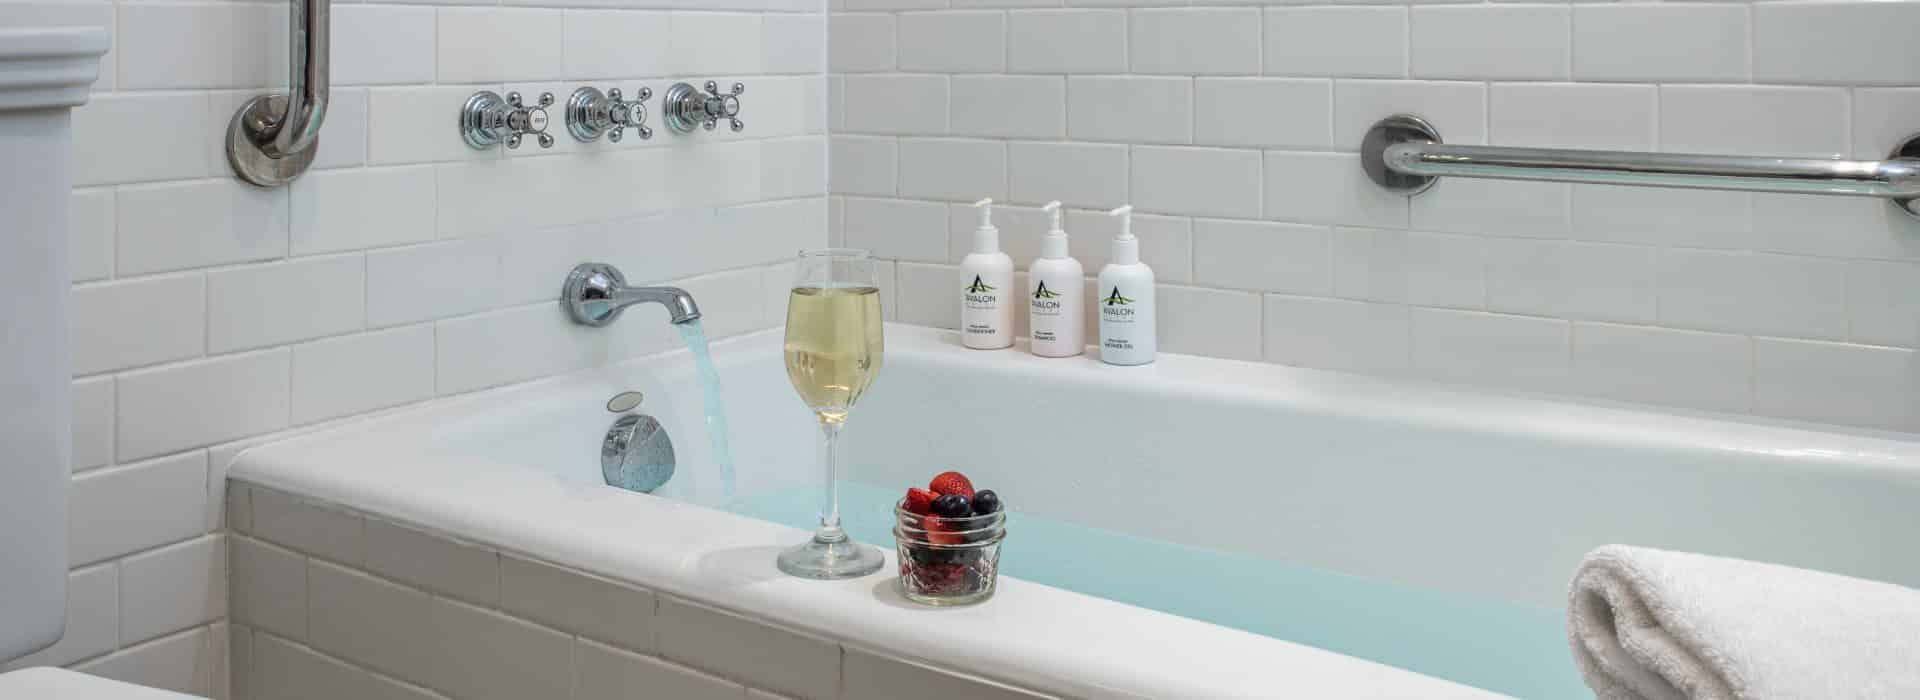 Close up view of bathtub surrounded by white tiles, glass of white wine, jar of fresh fruit, and branded toiletries